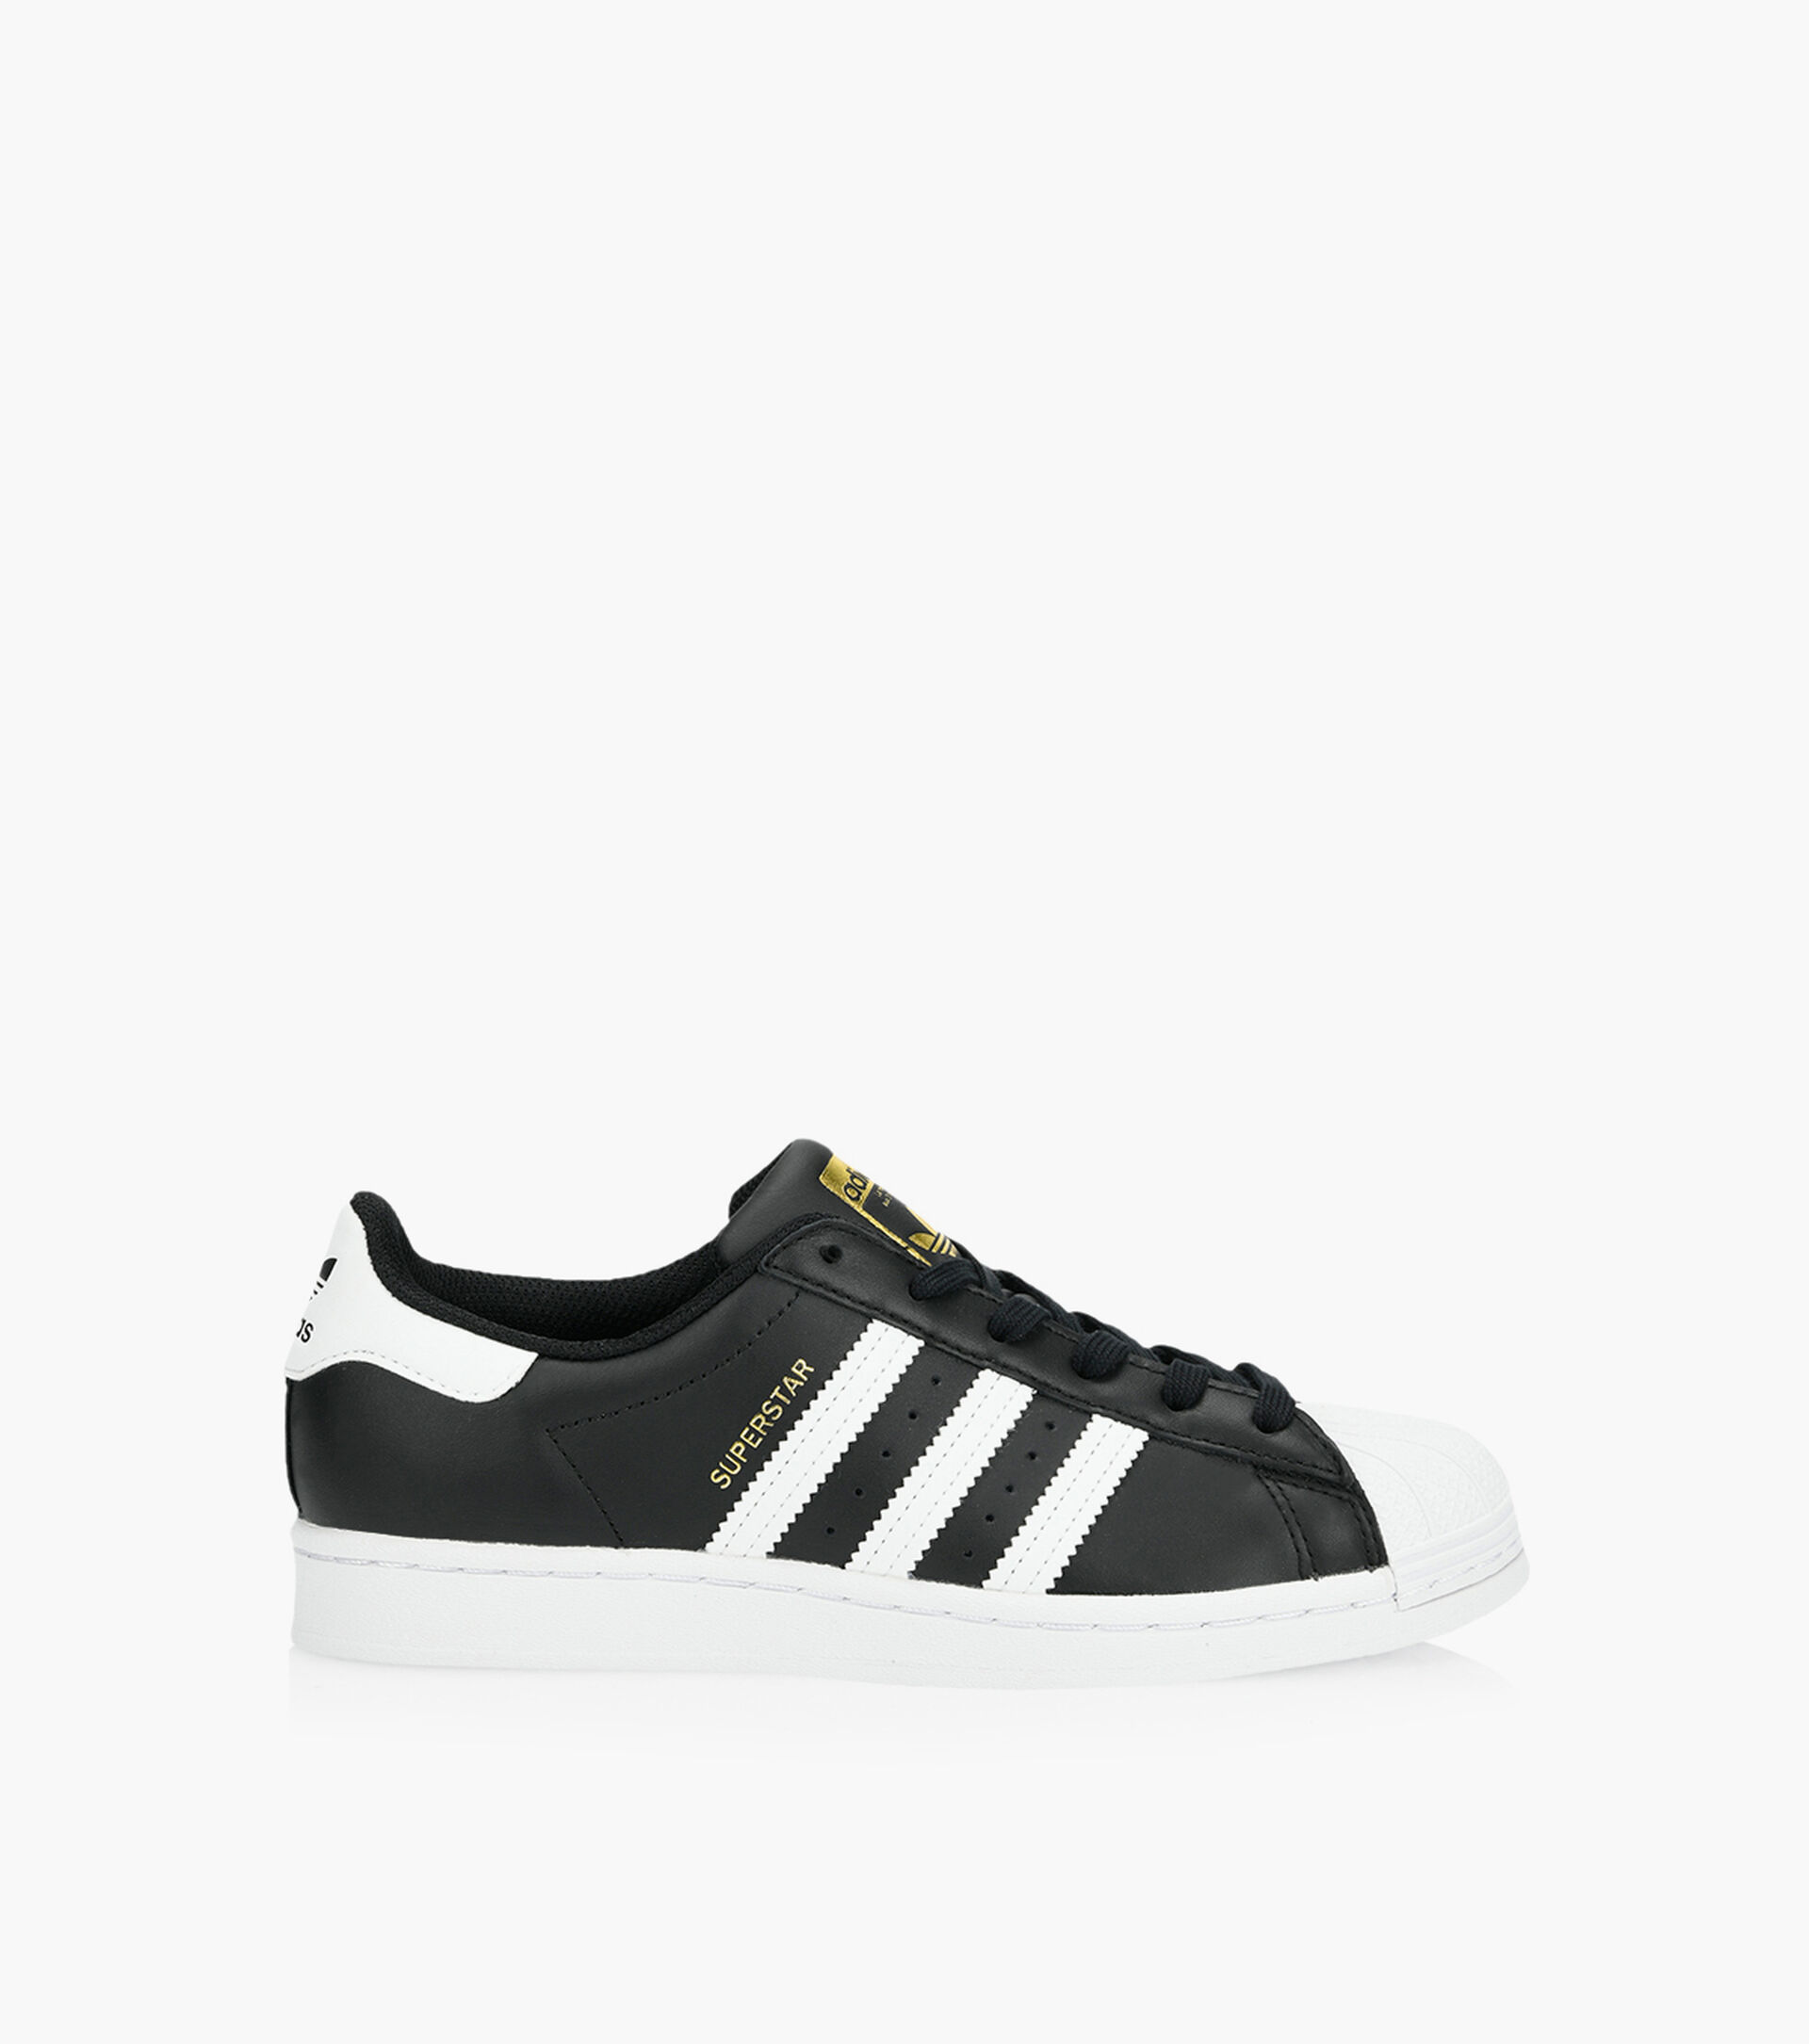 ADIDAS SUPERSTAR - Black Leather | Browns Shoes